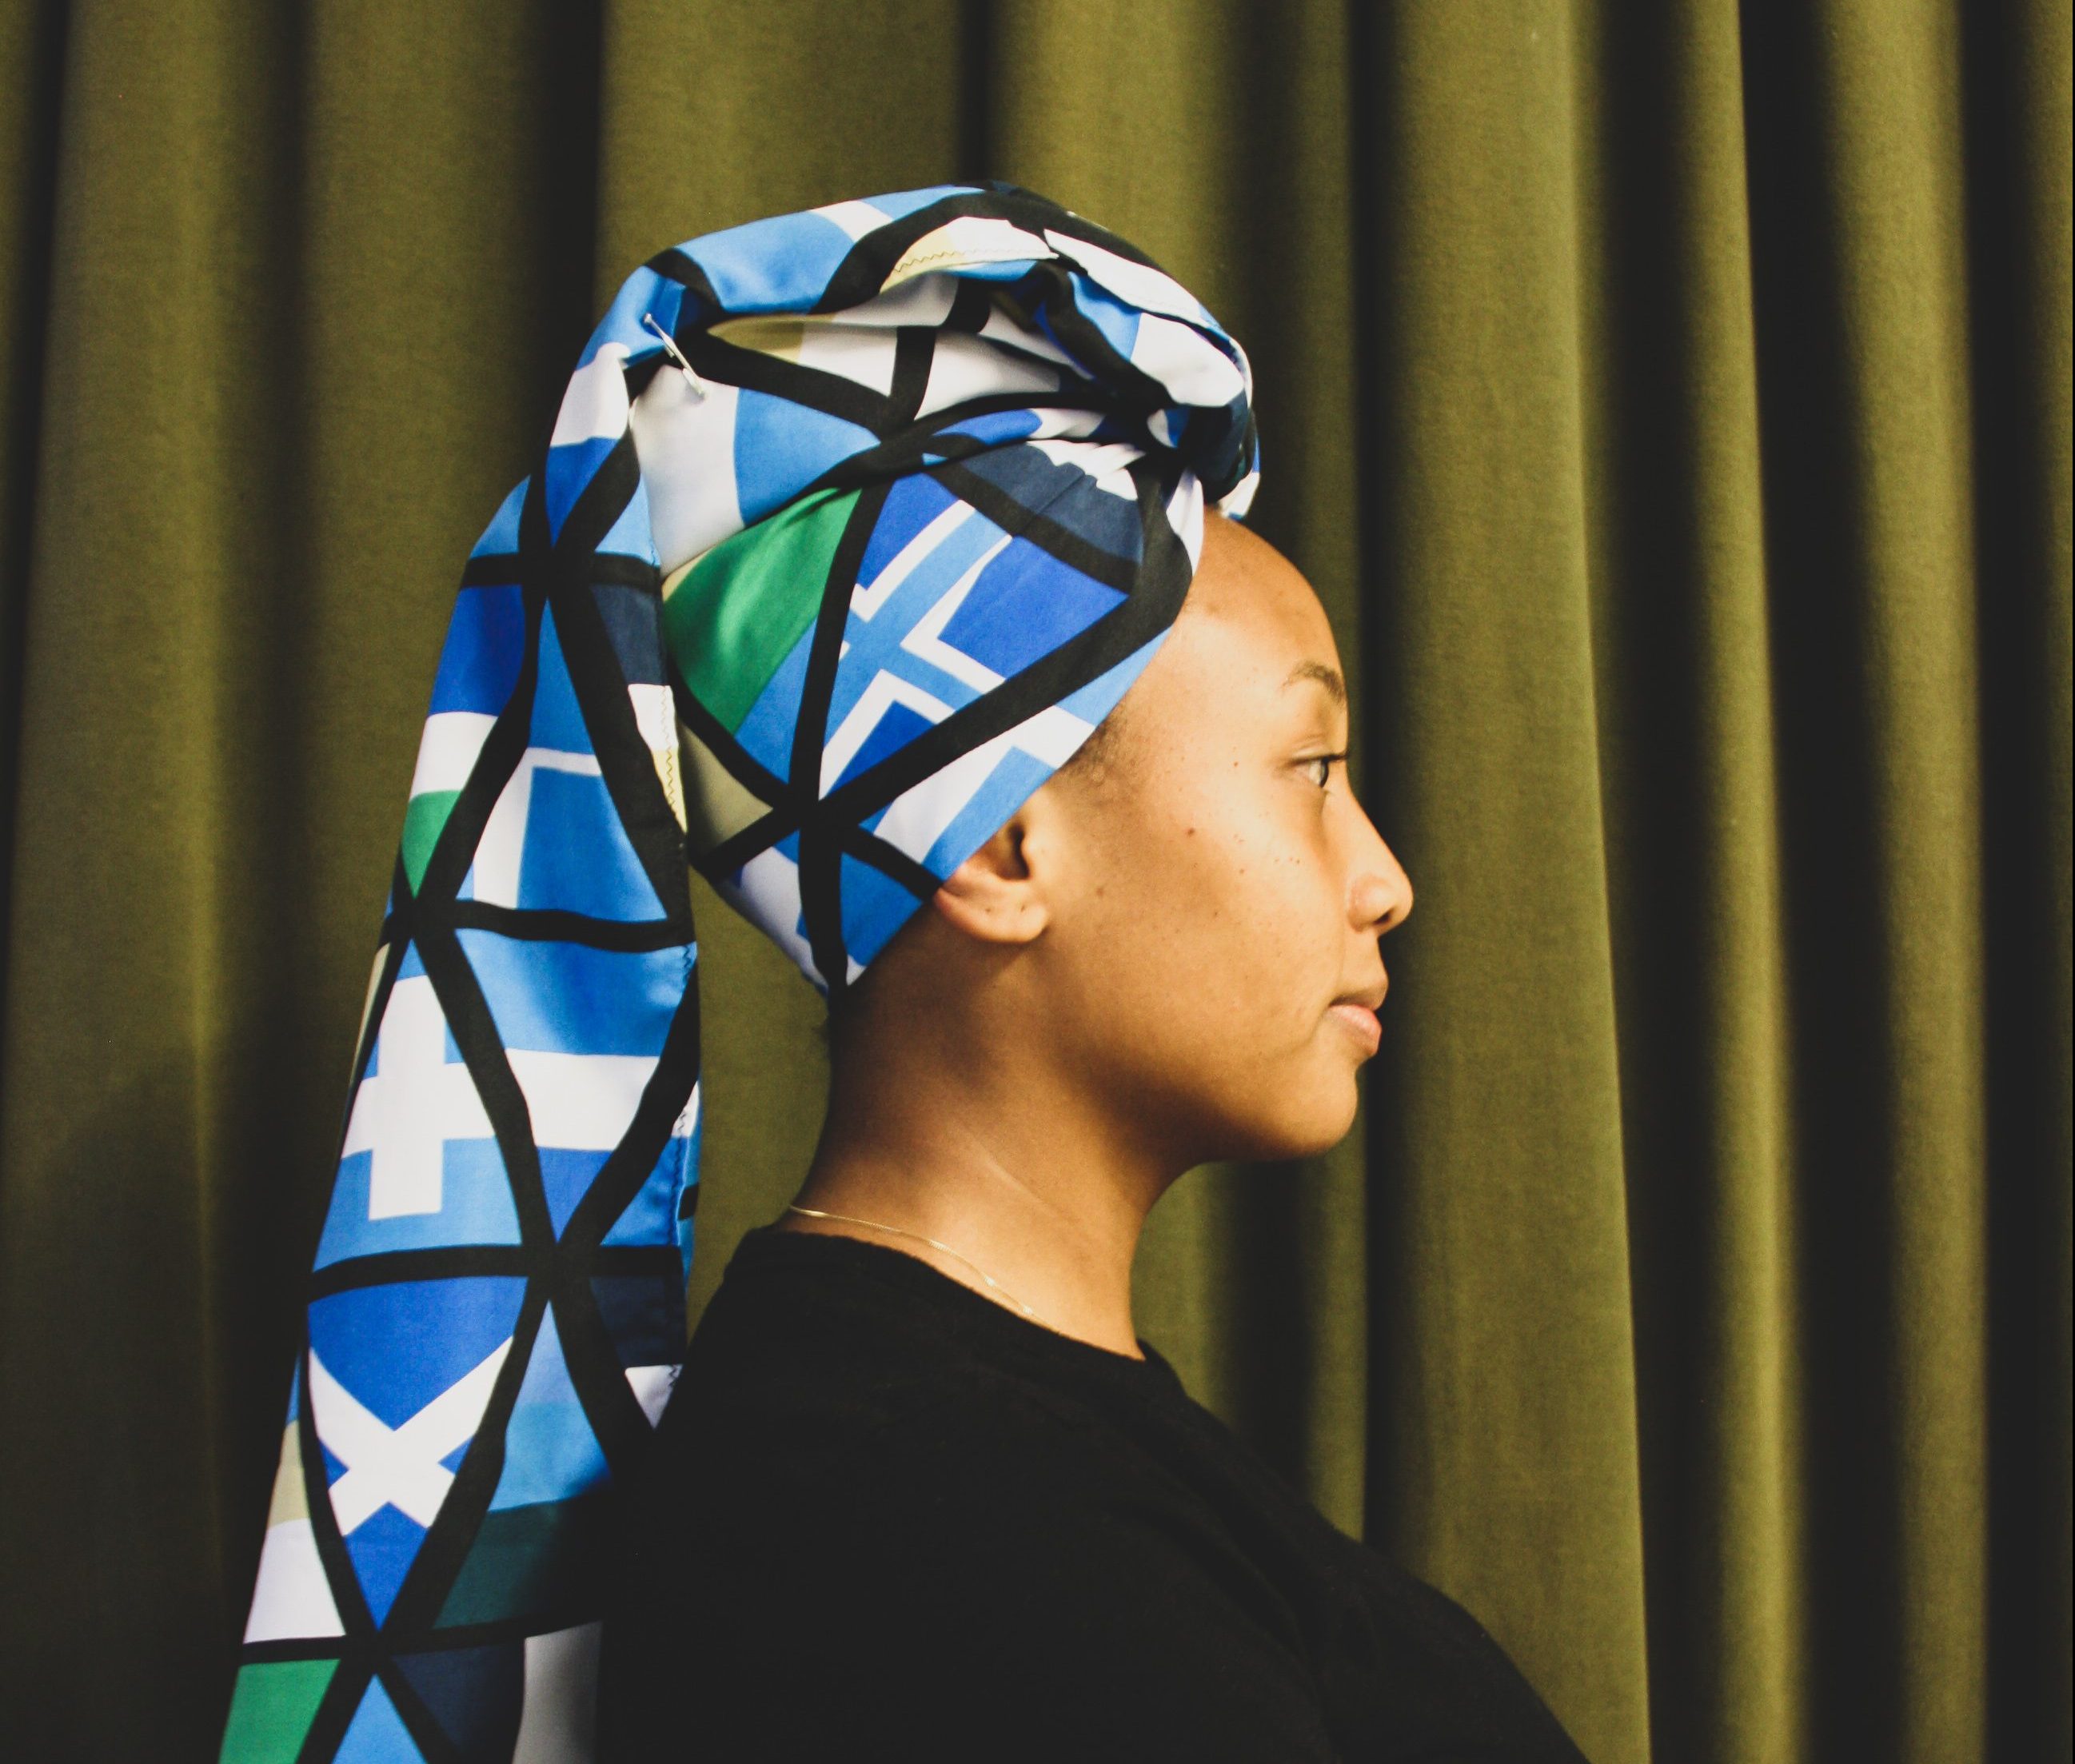 Headwrap histories: a workshop and interview with Turbante-se